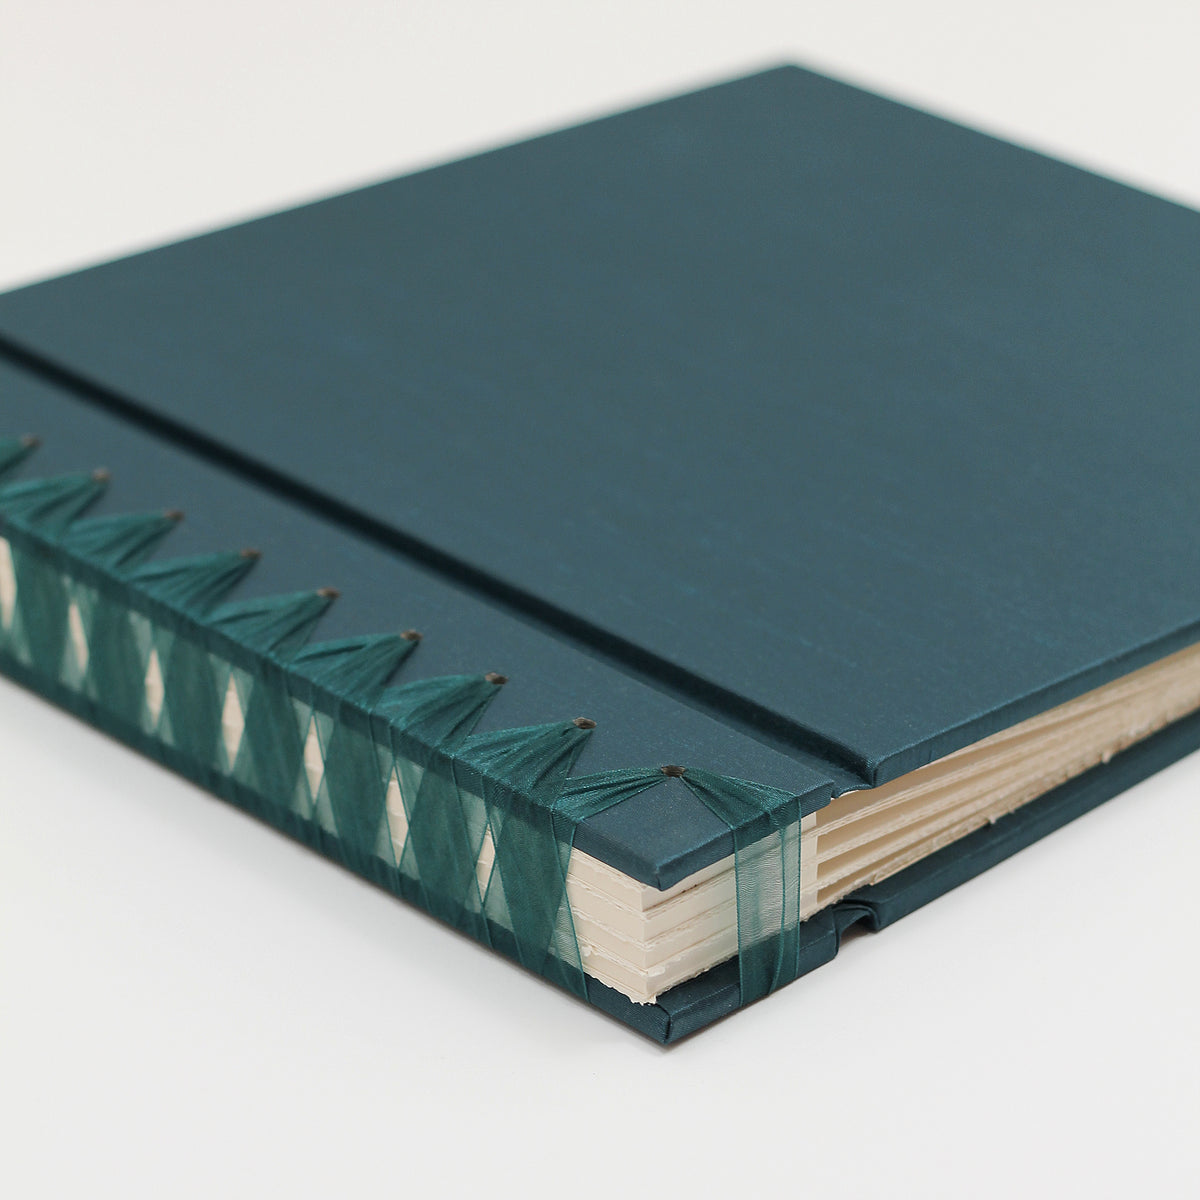 12 x 15 Deluxe Album with Teal Blue Silk Cover